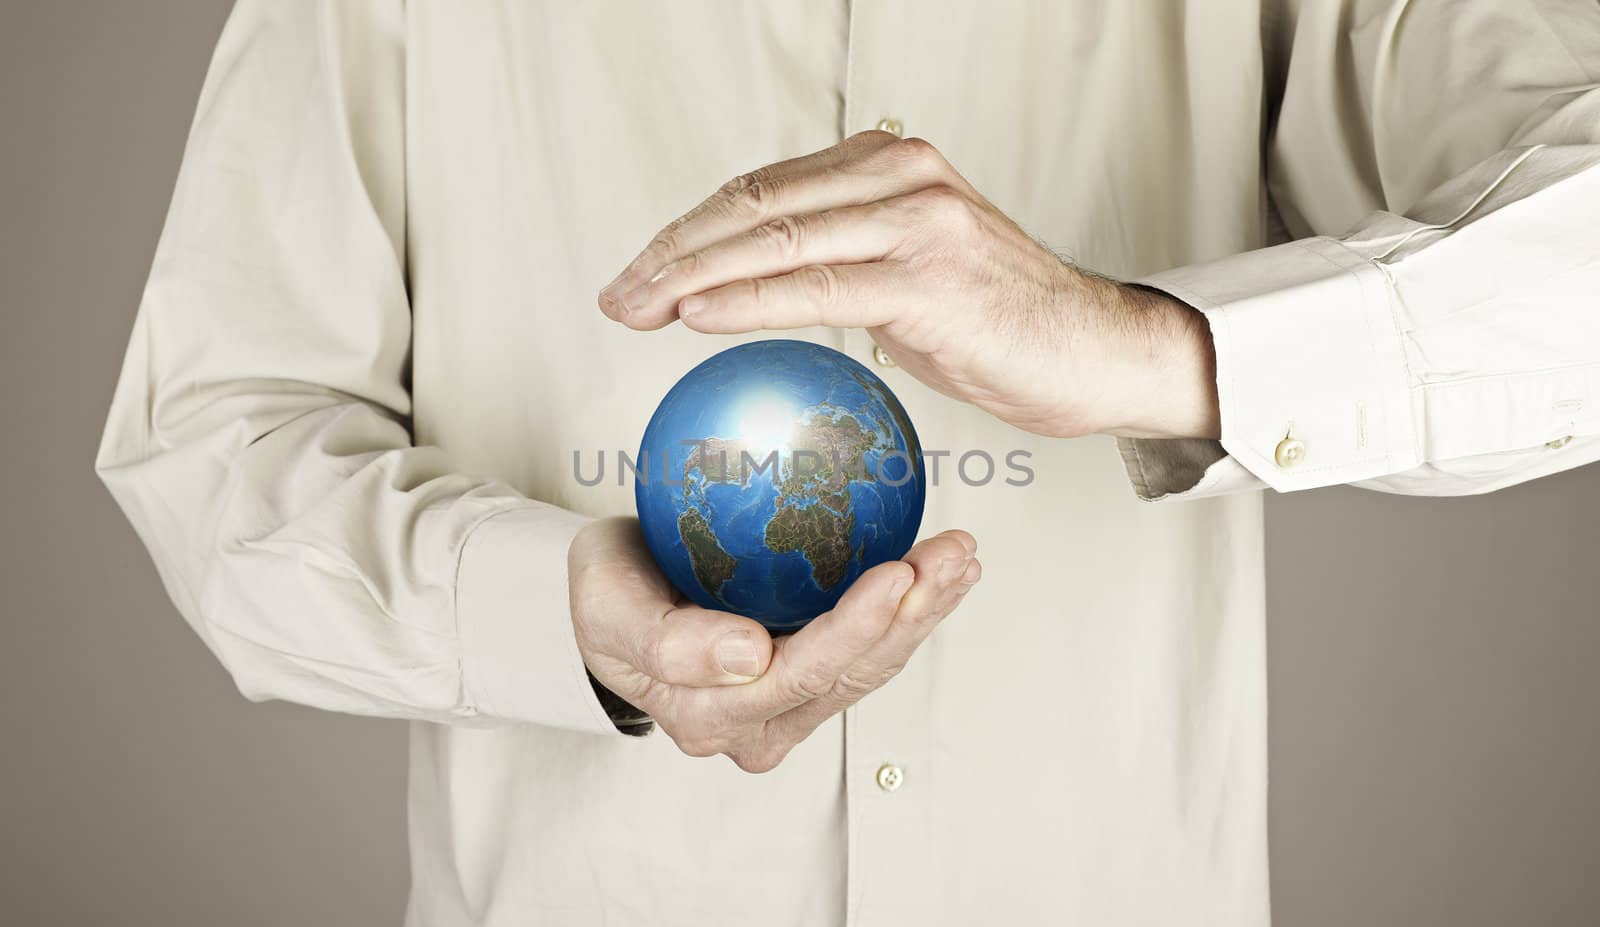 Hands protecting the planet earth